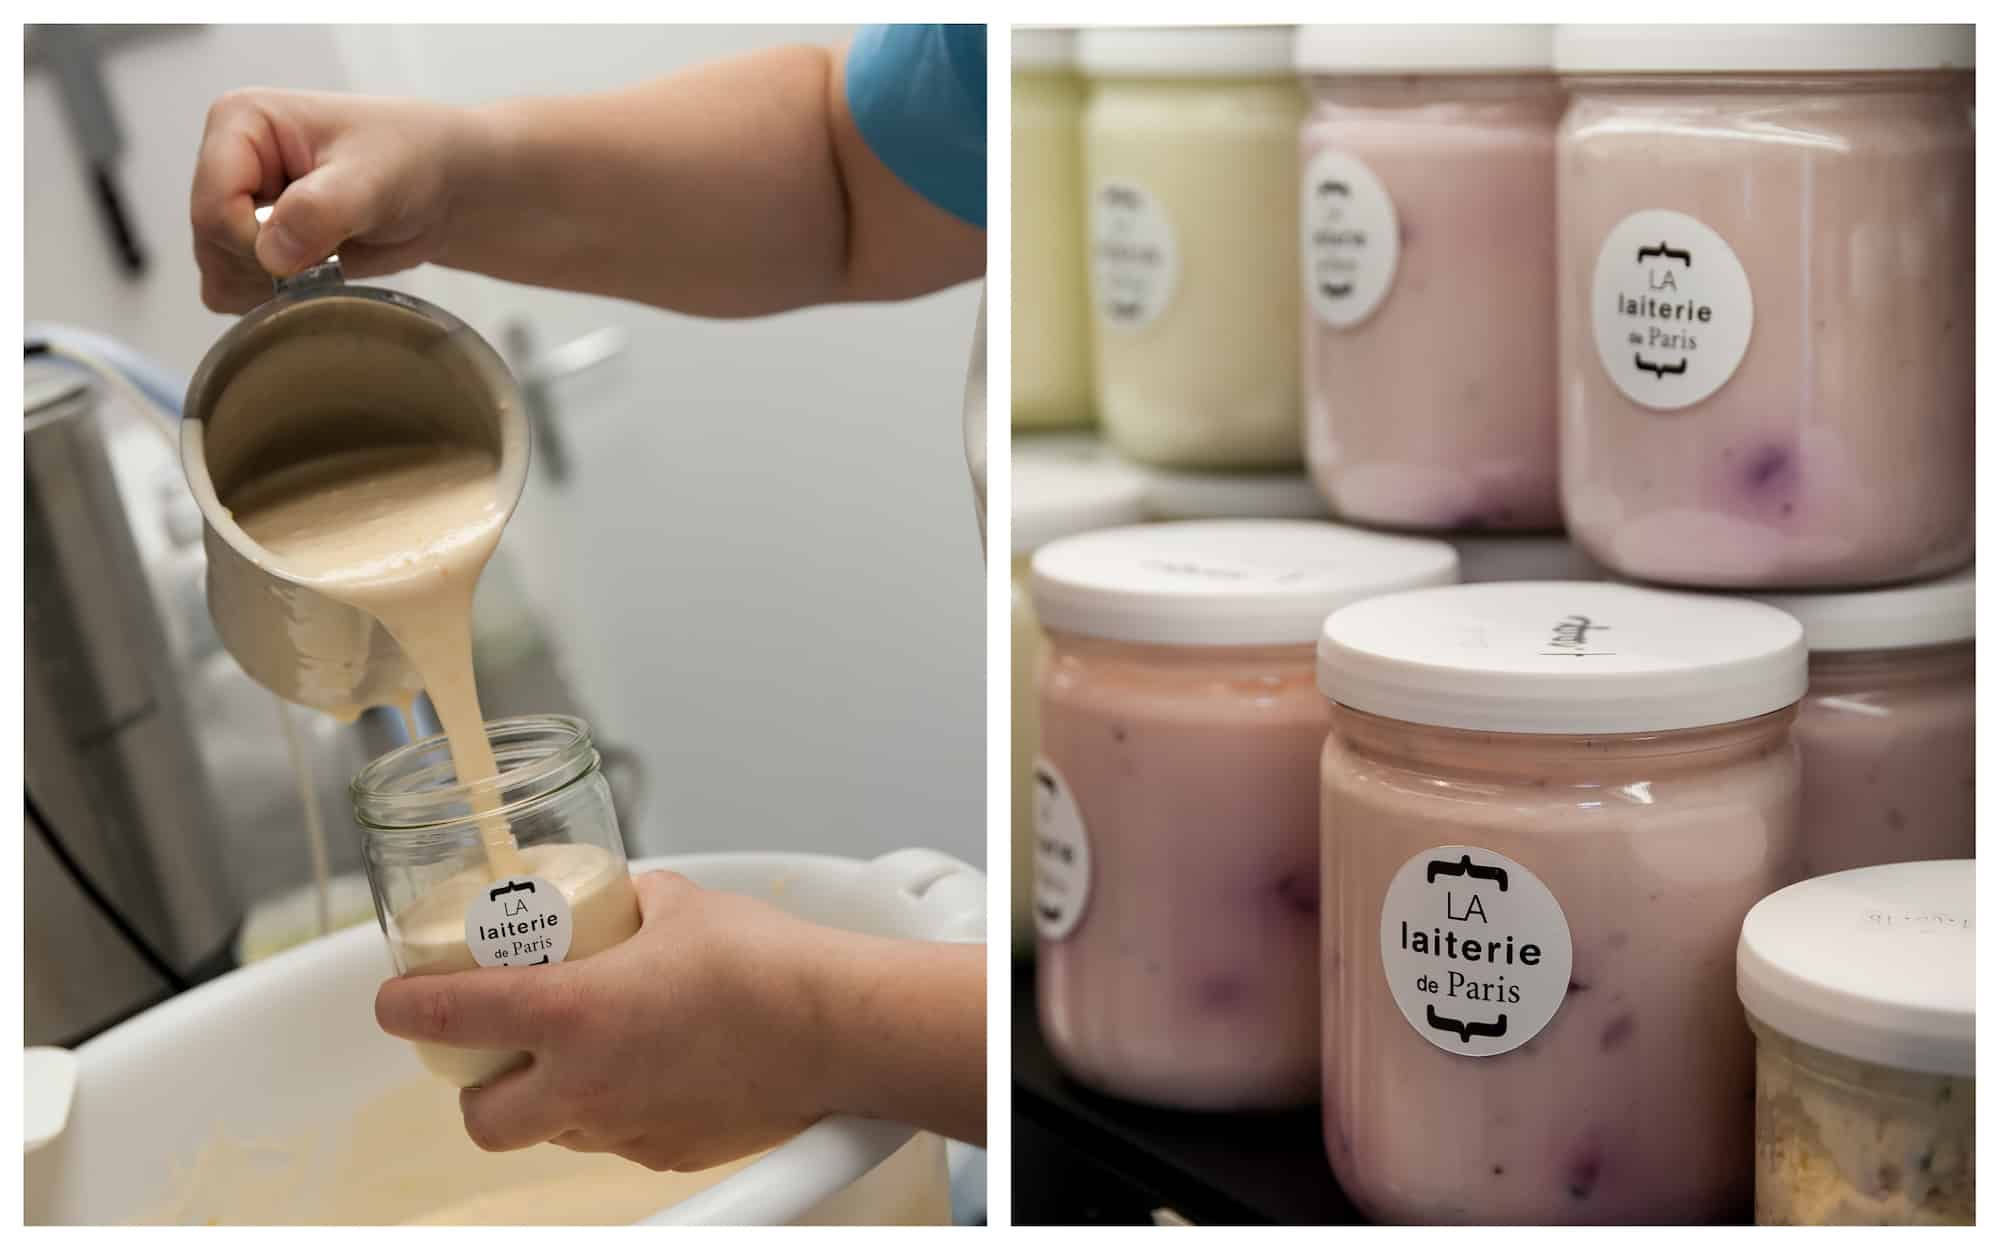 La Laiterie is Paris' first cheese dairy, which also makes yoghurts like the one being poured into a jar (left). La Laiterie makes a selection of yoghurts (right).